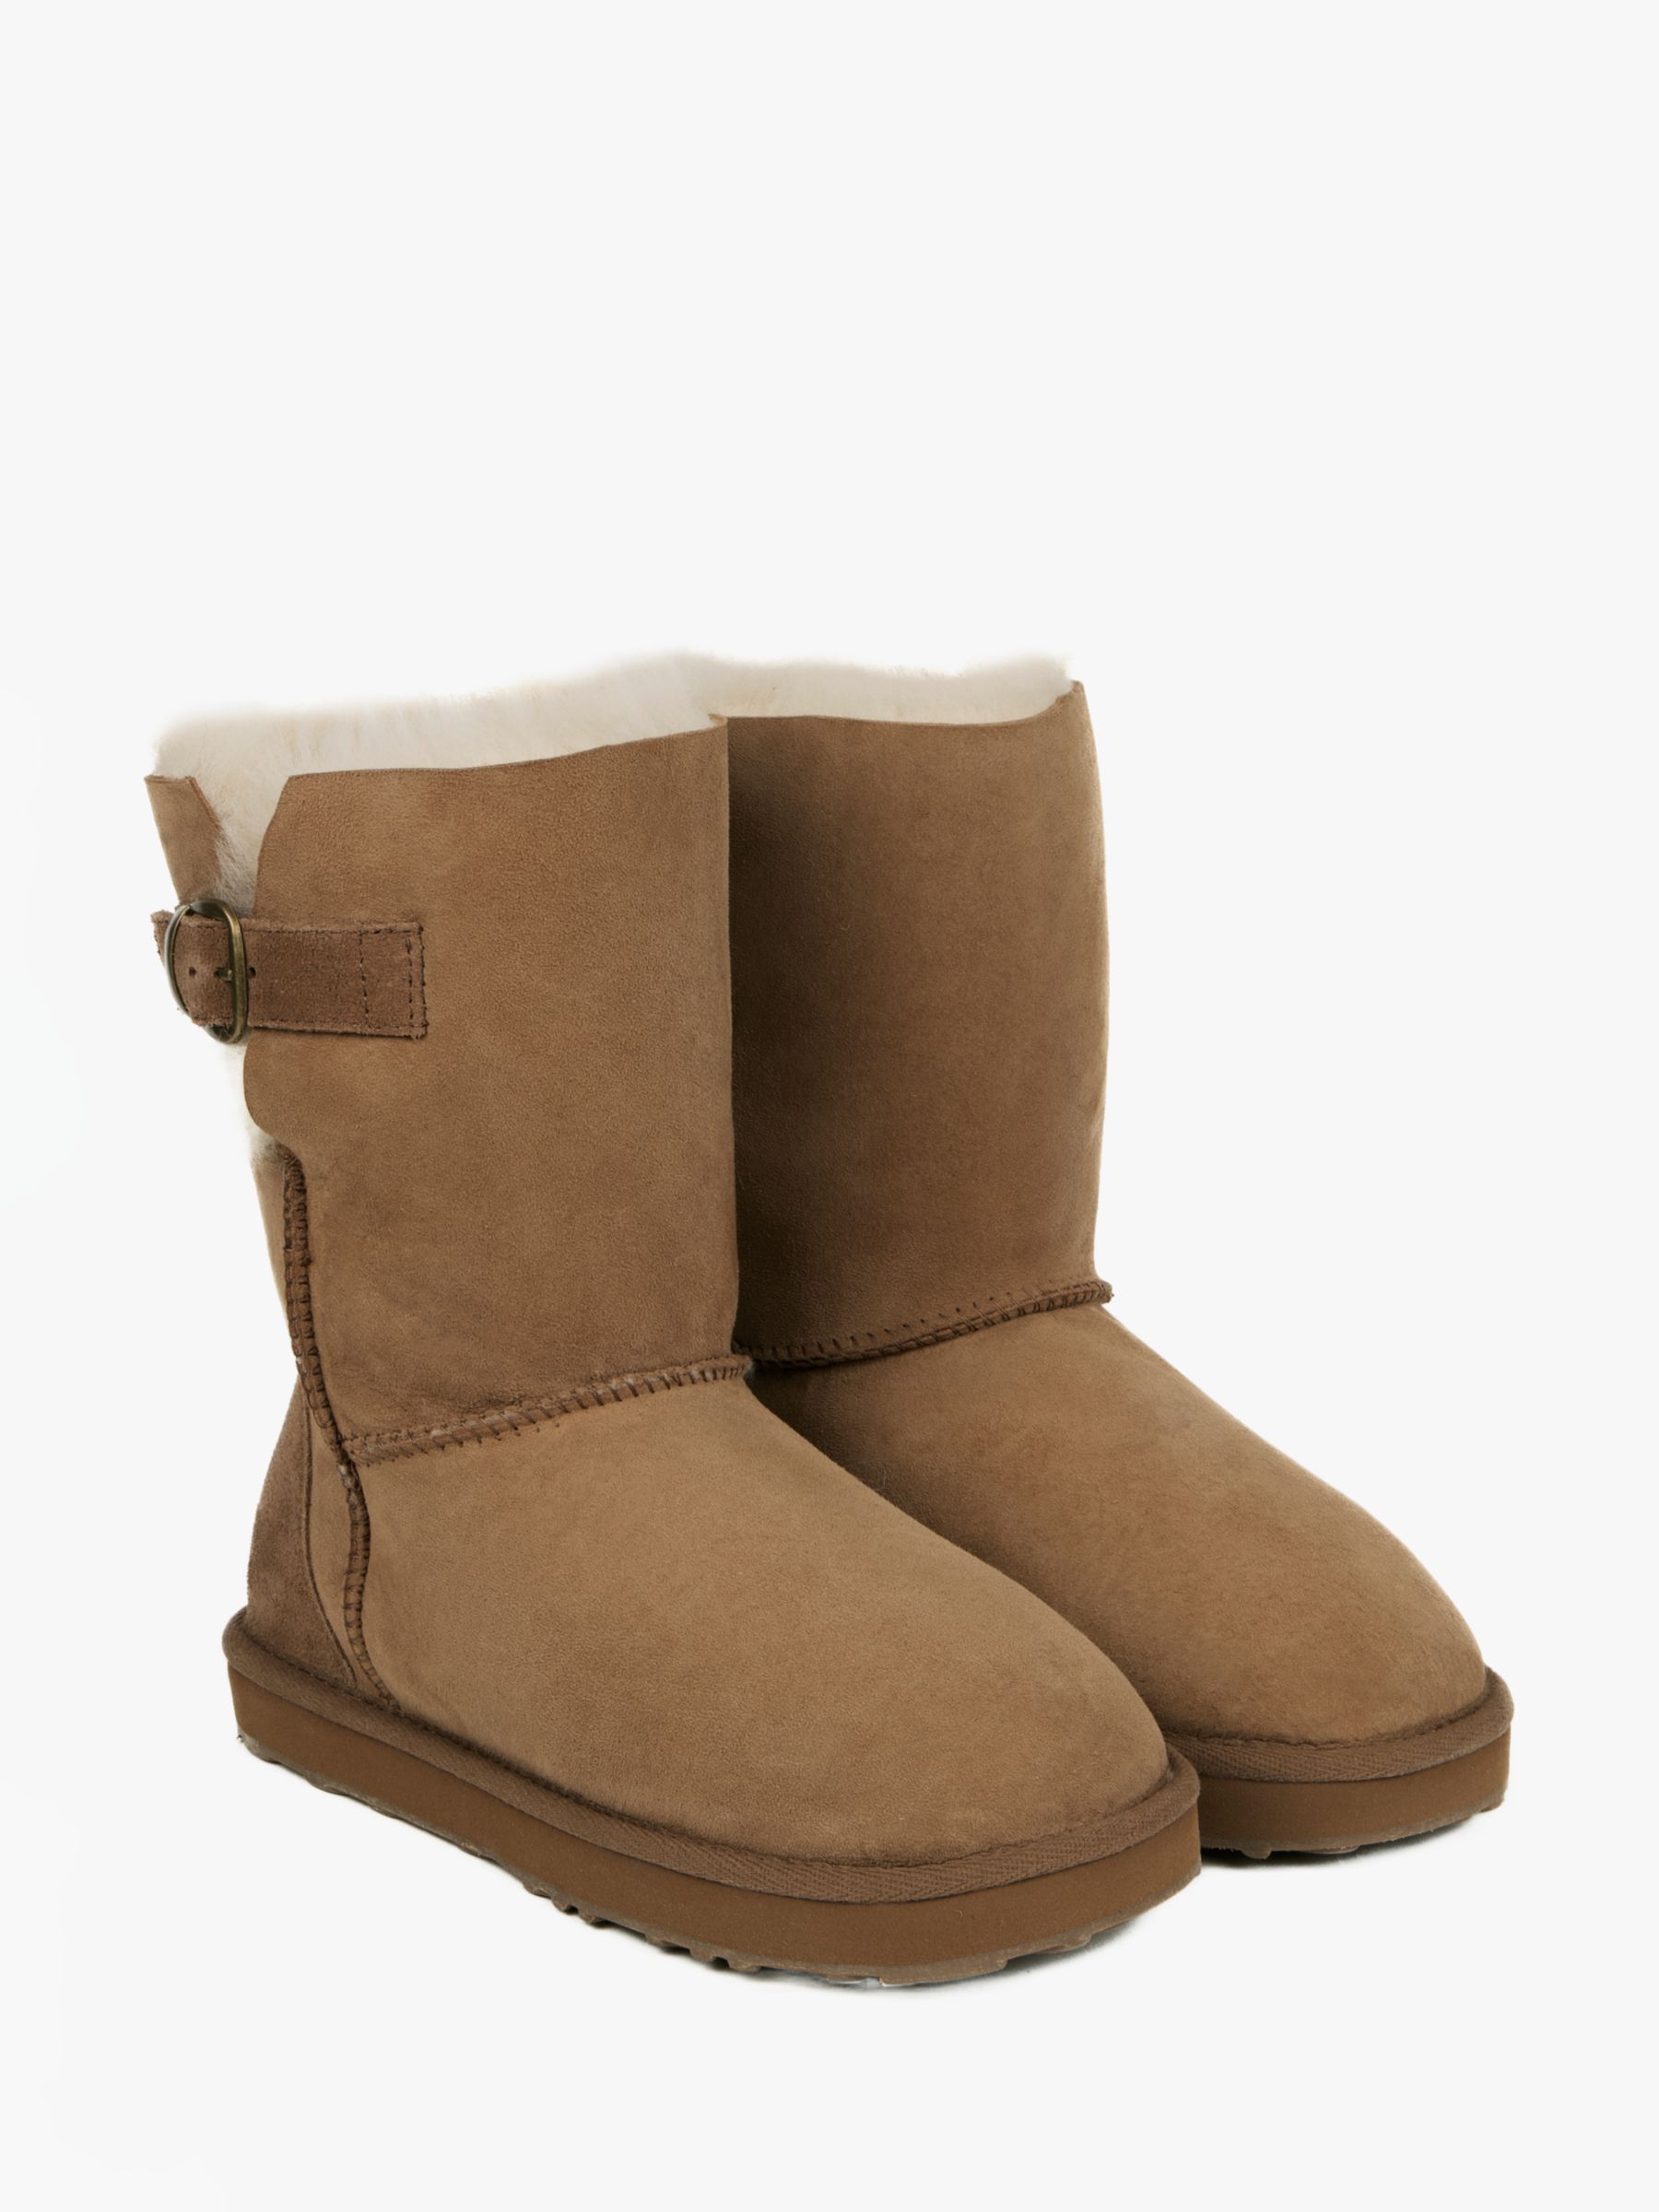 Buy Just Sheepskin Surrey Suede Ankle Boots Online at johnlewis.com